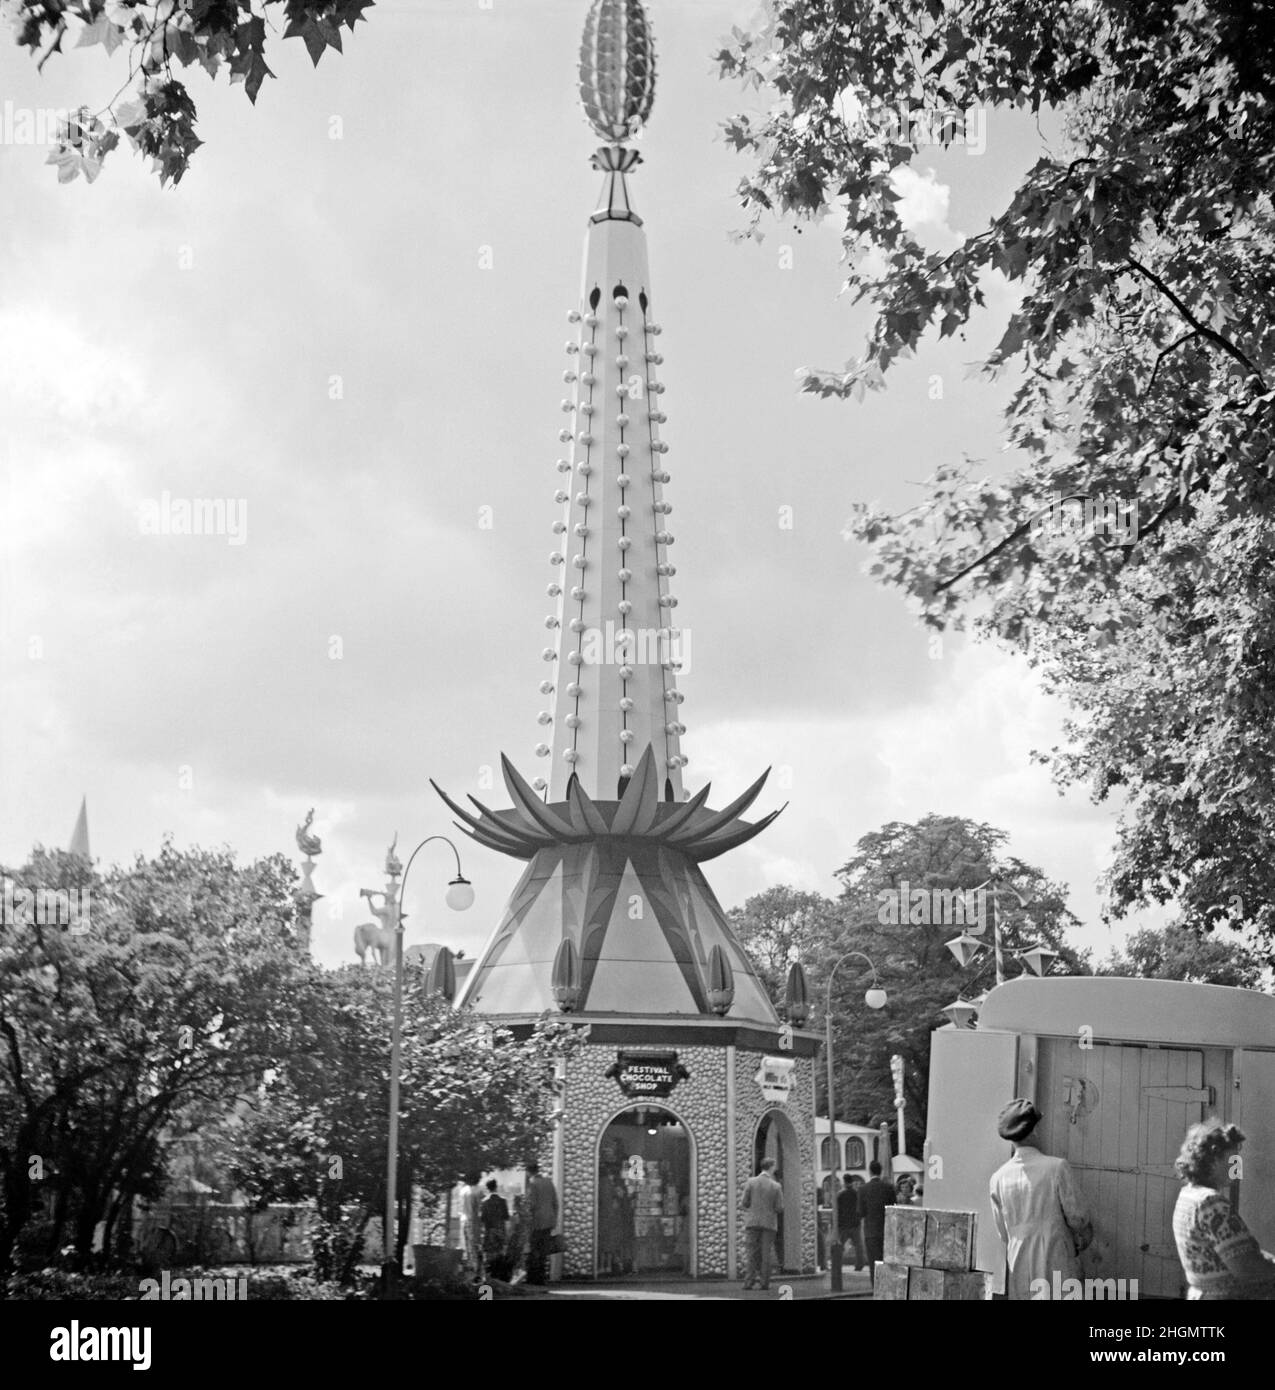 The popular ‘Festival Chocolate Shop’ at the Festival of Britain Pleasure Gardens, Battersea Park, London, England, UK during the celebrations in 1951. The pleasure gardens were an important part of the festival. A very decorative, fun design is a feature of the shop with organic ‘plant’ motifs used – a ‘pineapple’ tops off the building. It is also covered in light bulbs for night-time illumination. This image is from an old amateur black and white negative – a vintage 1950s photograph. Stock Photo